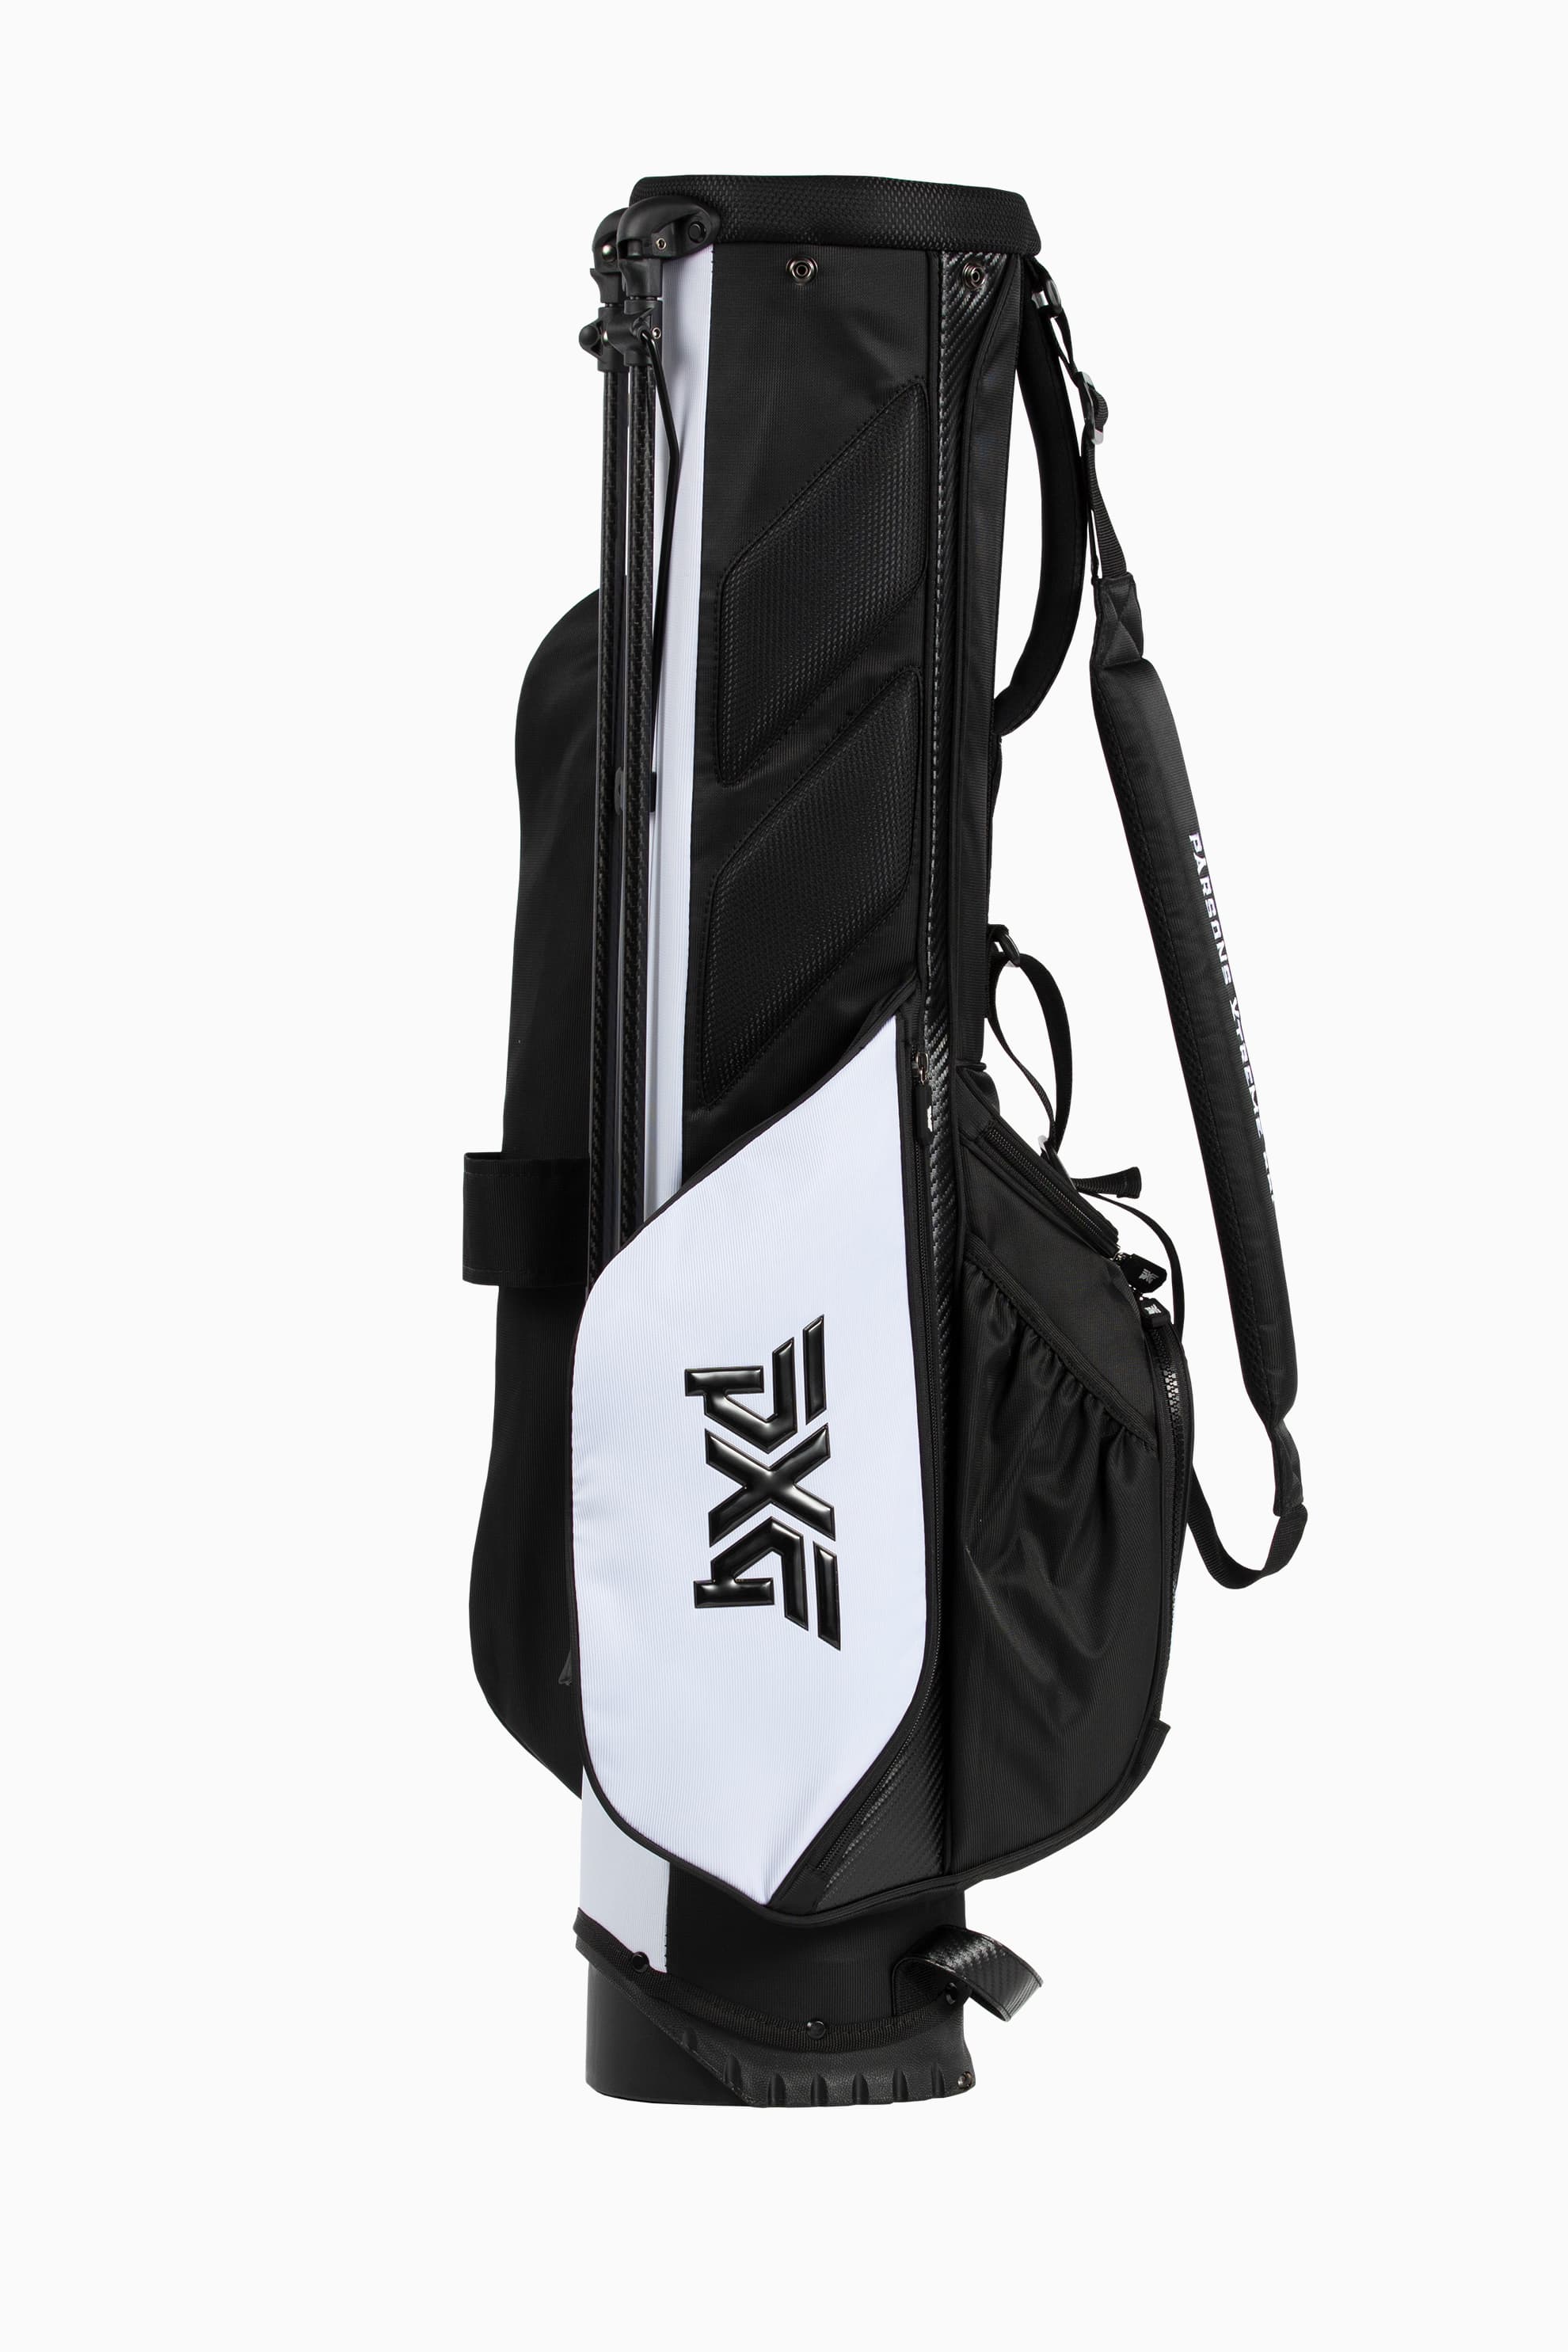 Sunday Stand Bag | Golf Bags | Standing, Carry & Cart Bags - PXG